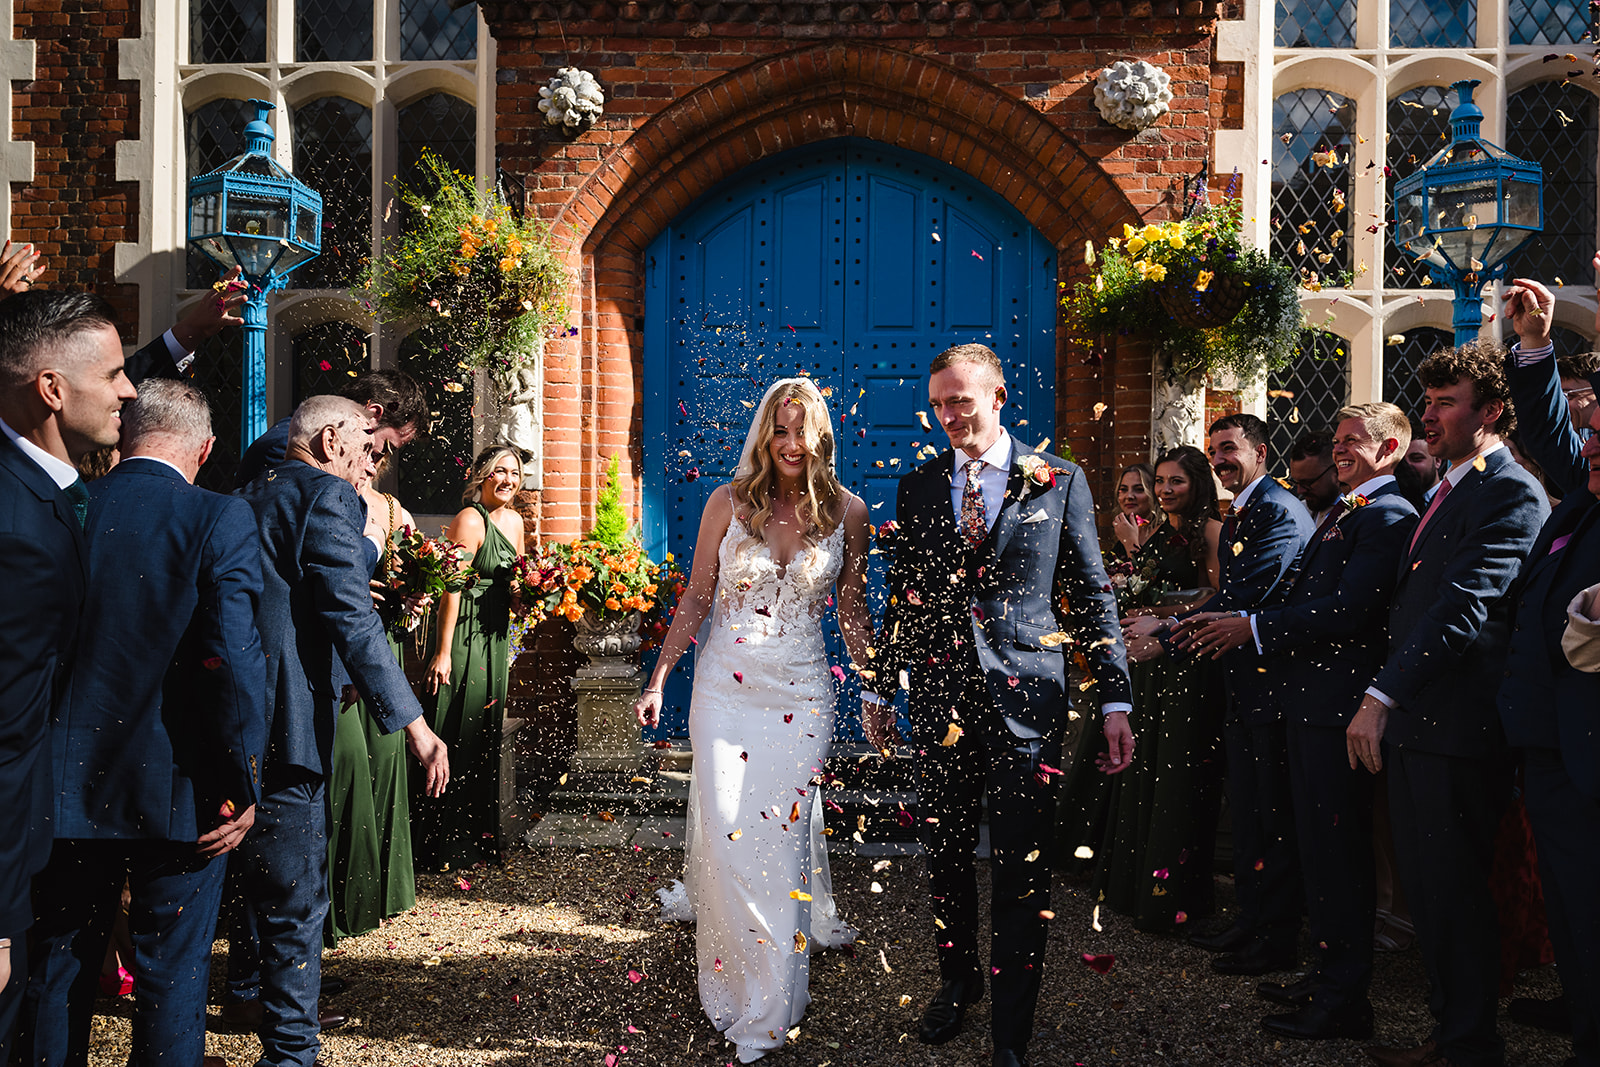 Bride and groom walking through confetti at gosfield hall